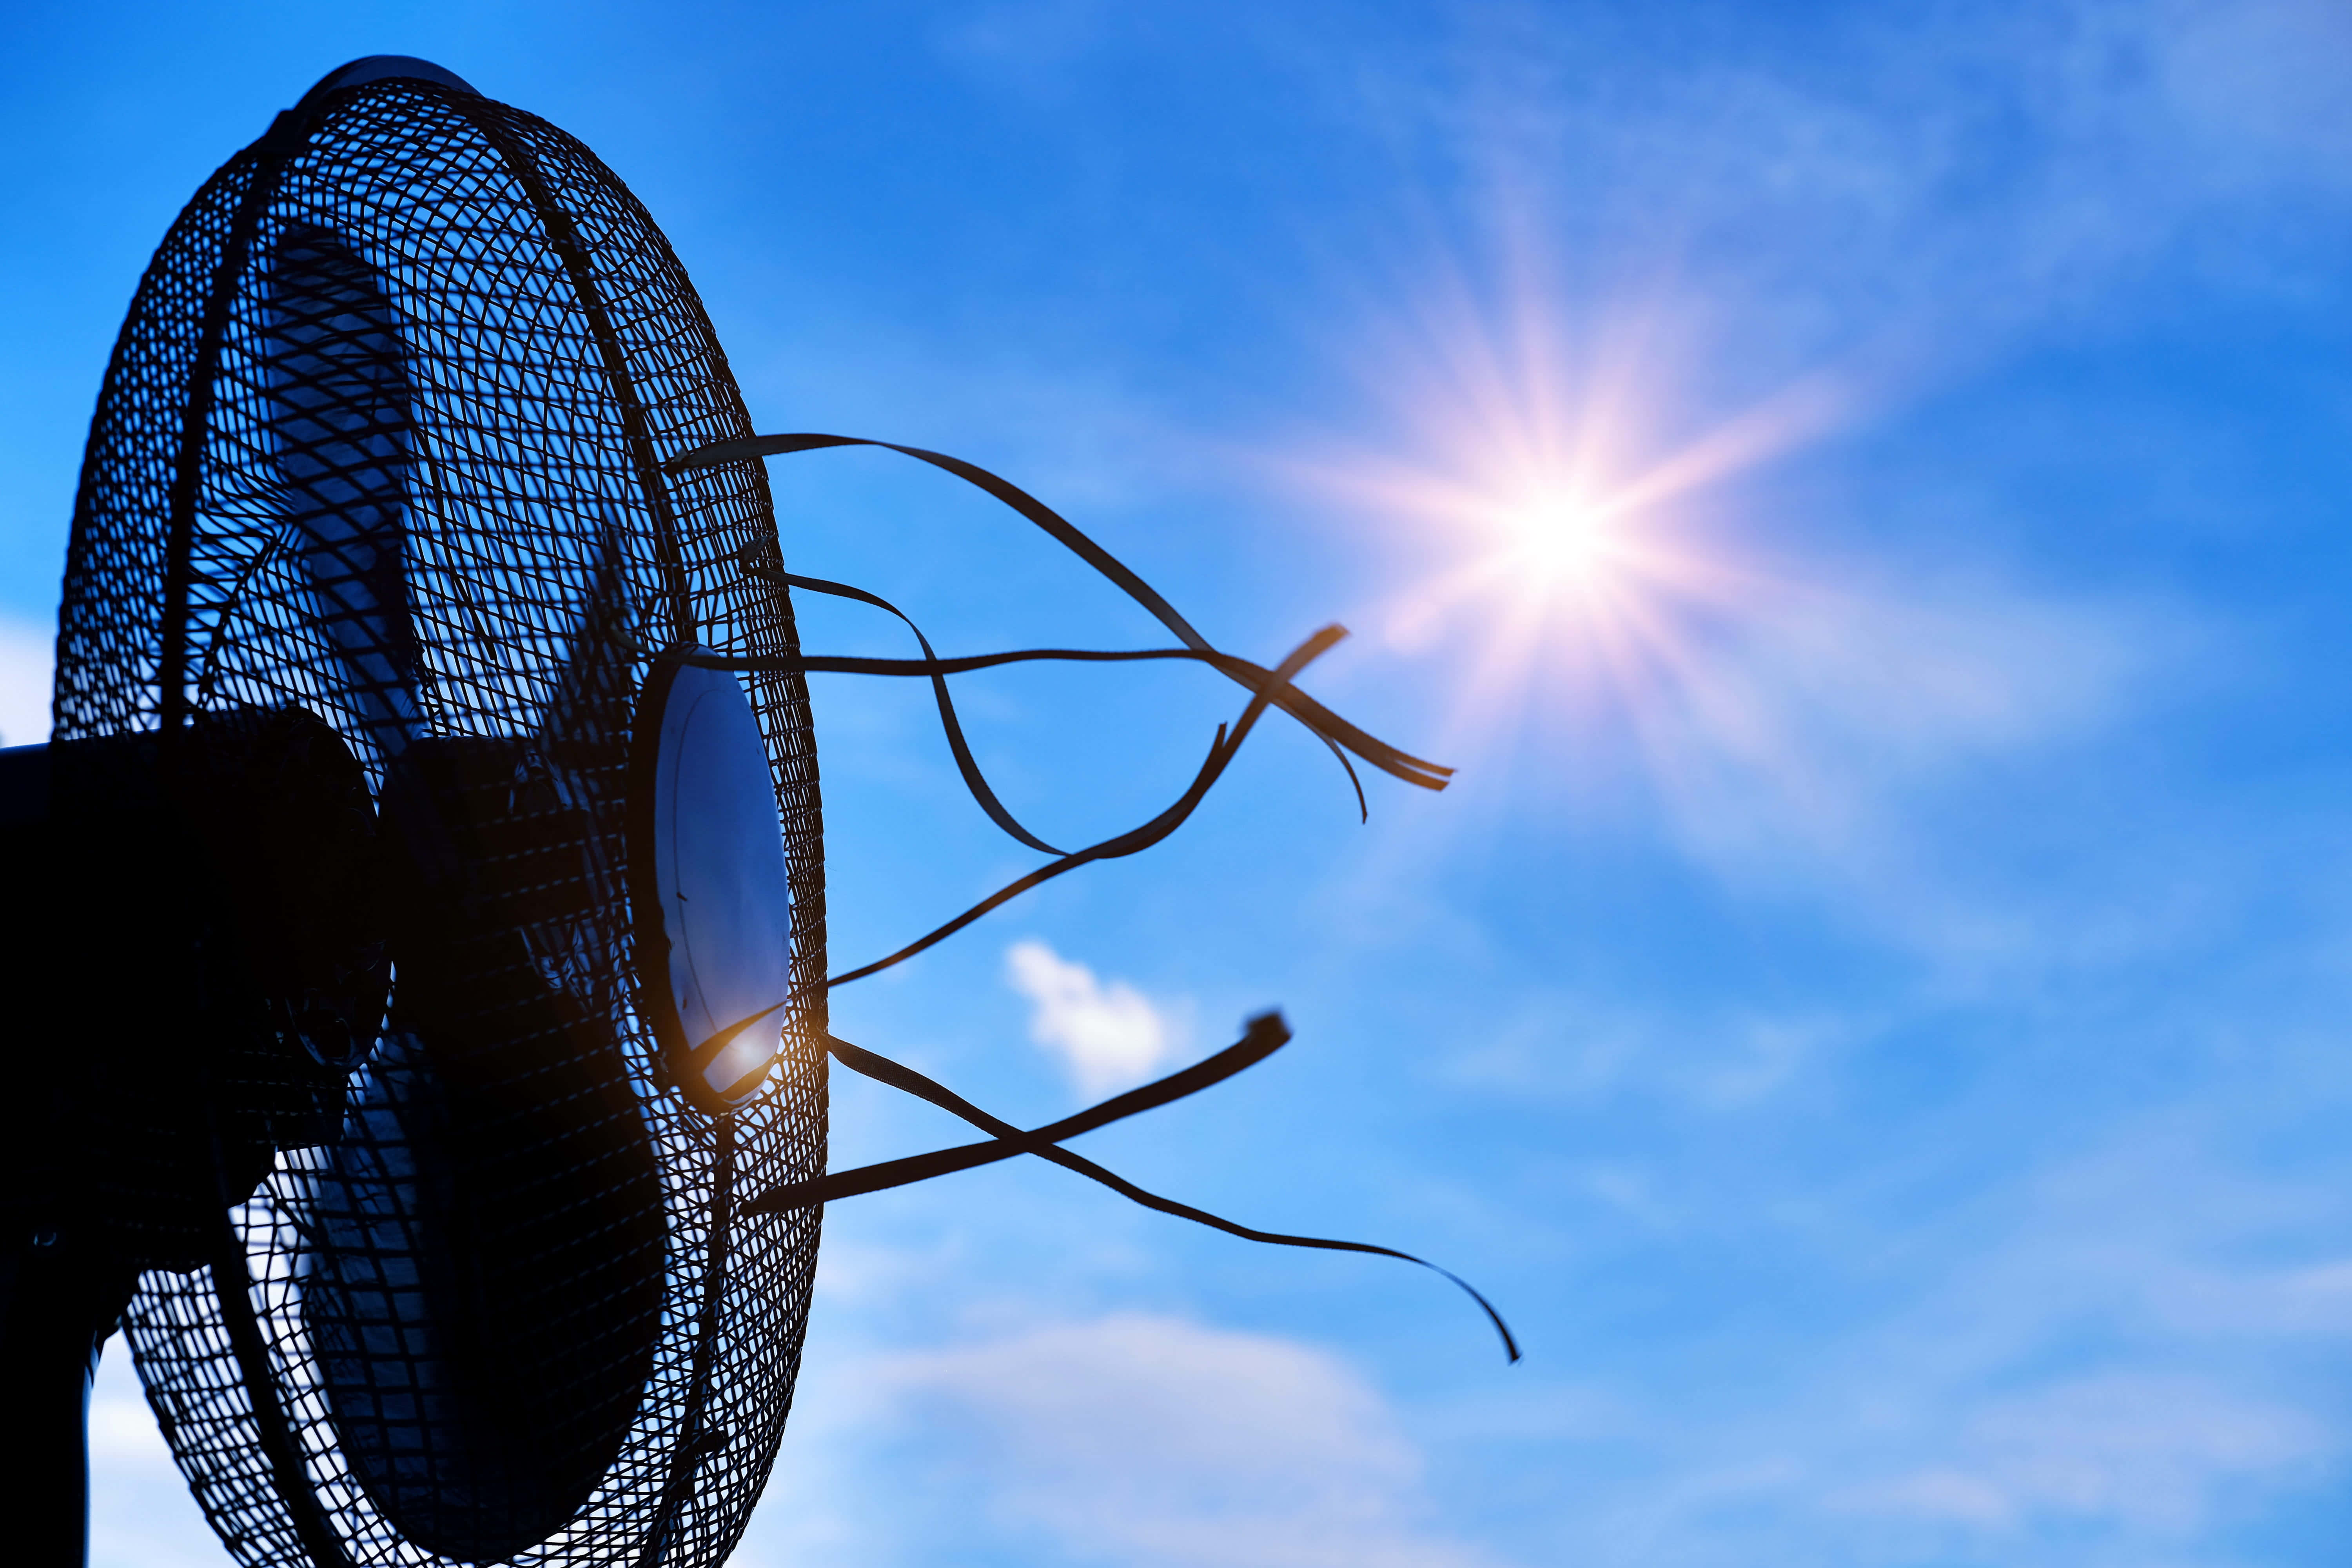 A Fan Is Shown Against A Blue Sky Background